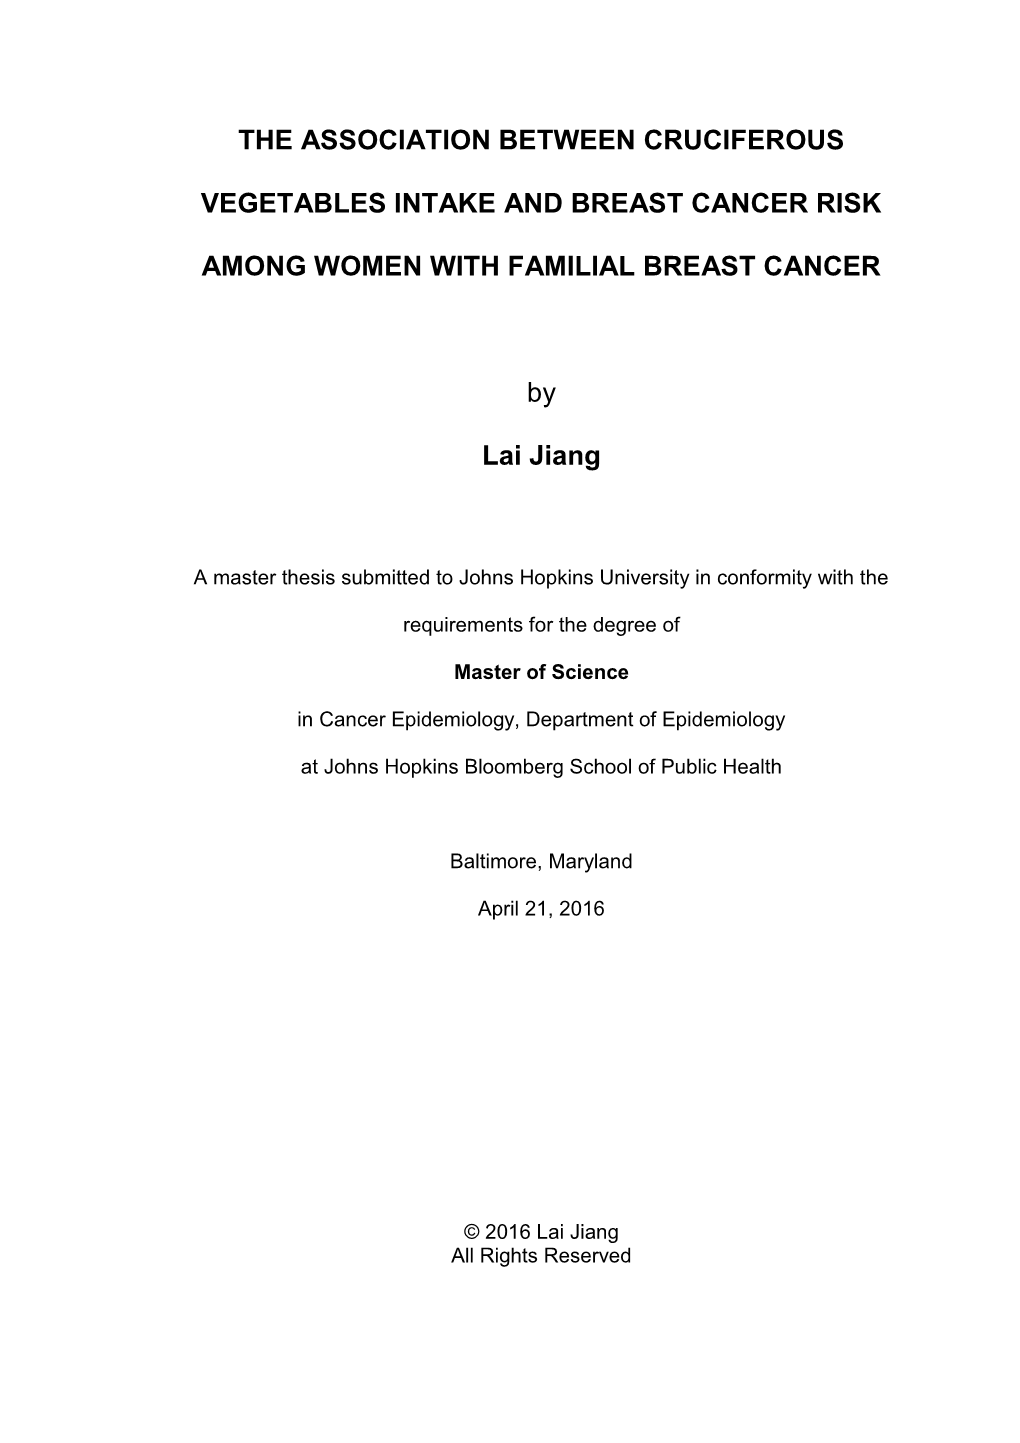 The Association Between Cruciferous Vegetables Consumption and Breast Cancer Risk Among Women with a Familial History of Breast Cancer